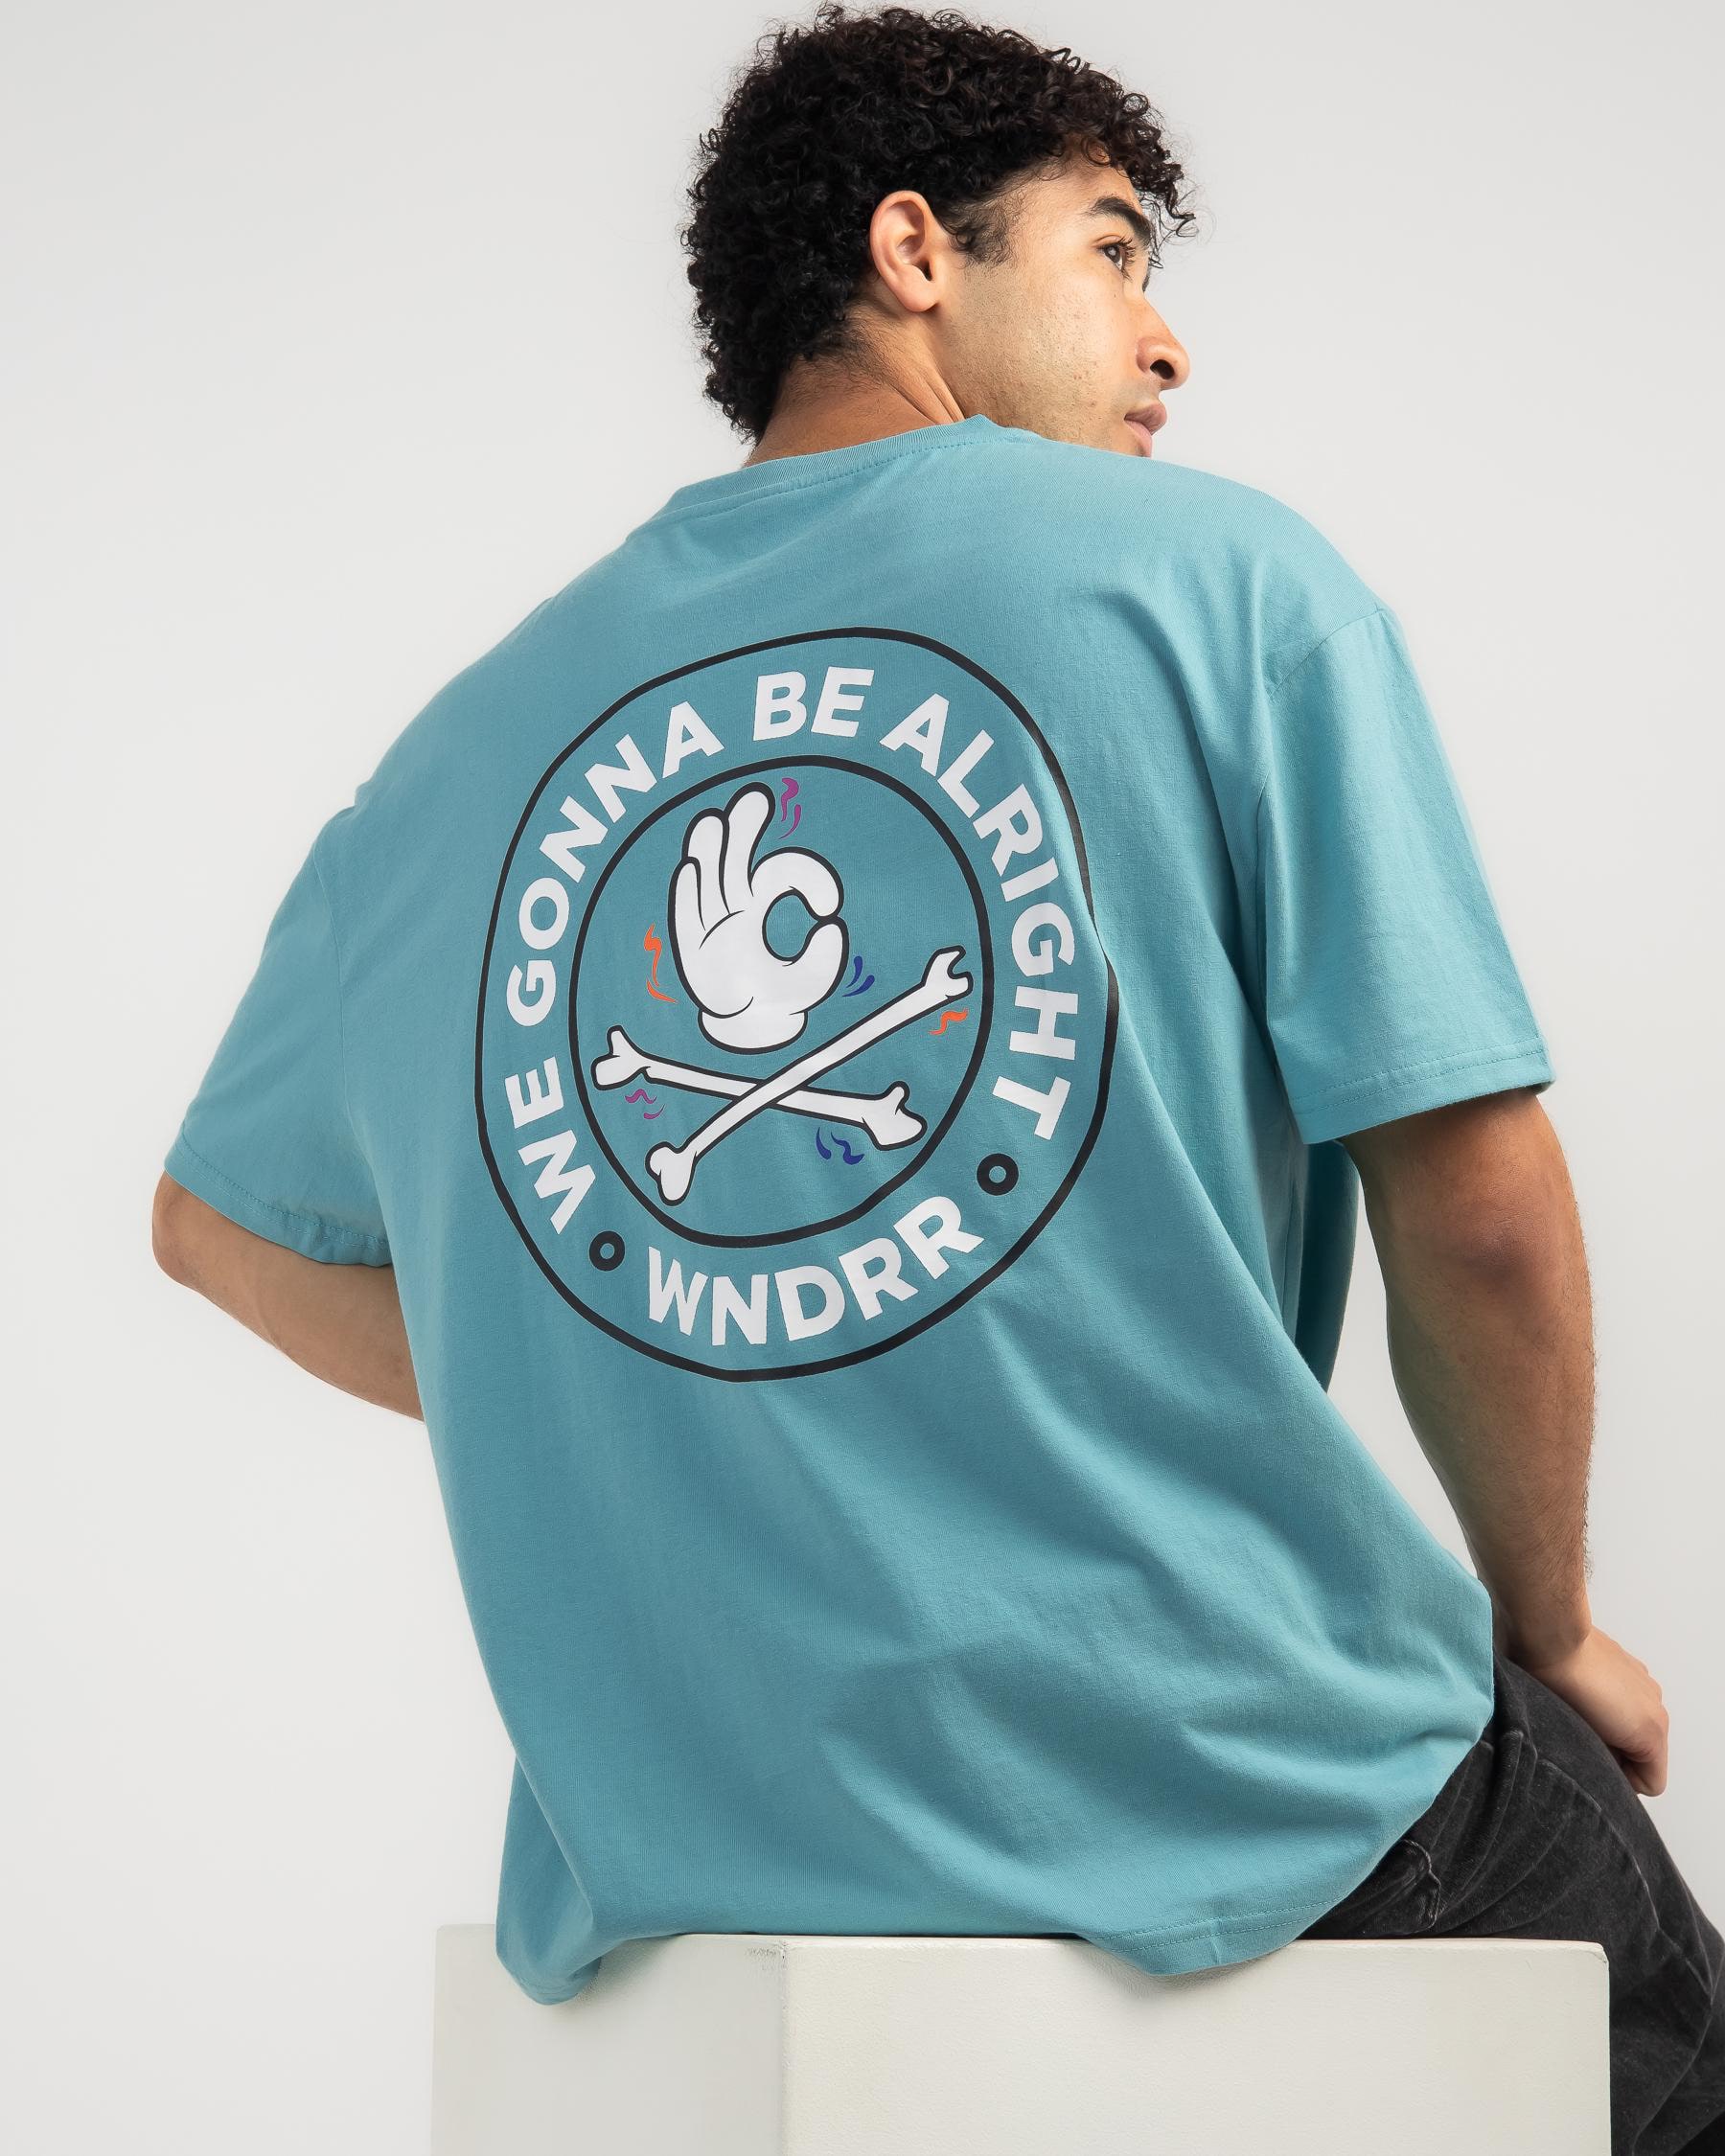 Wndrr Cross Check Box Fit T-Shirt In Teal - Fast Shipping & Easy ...